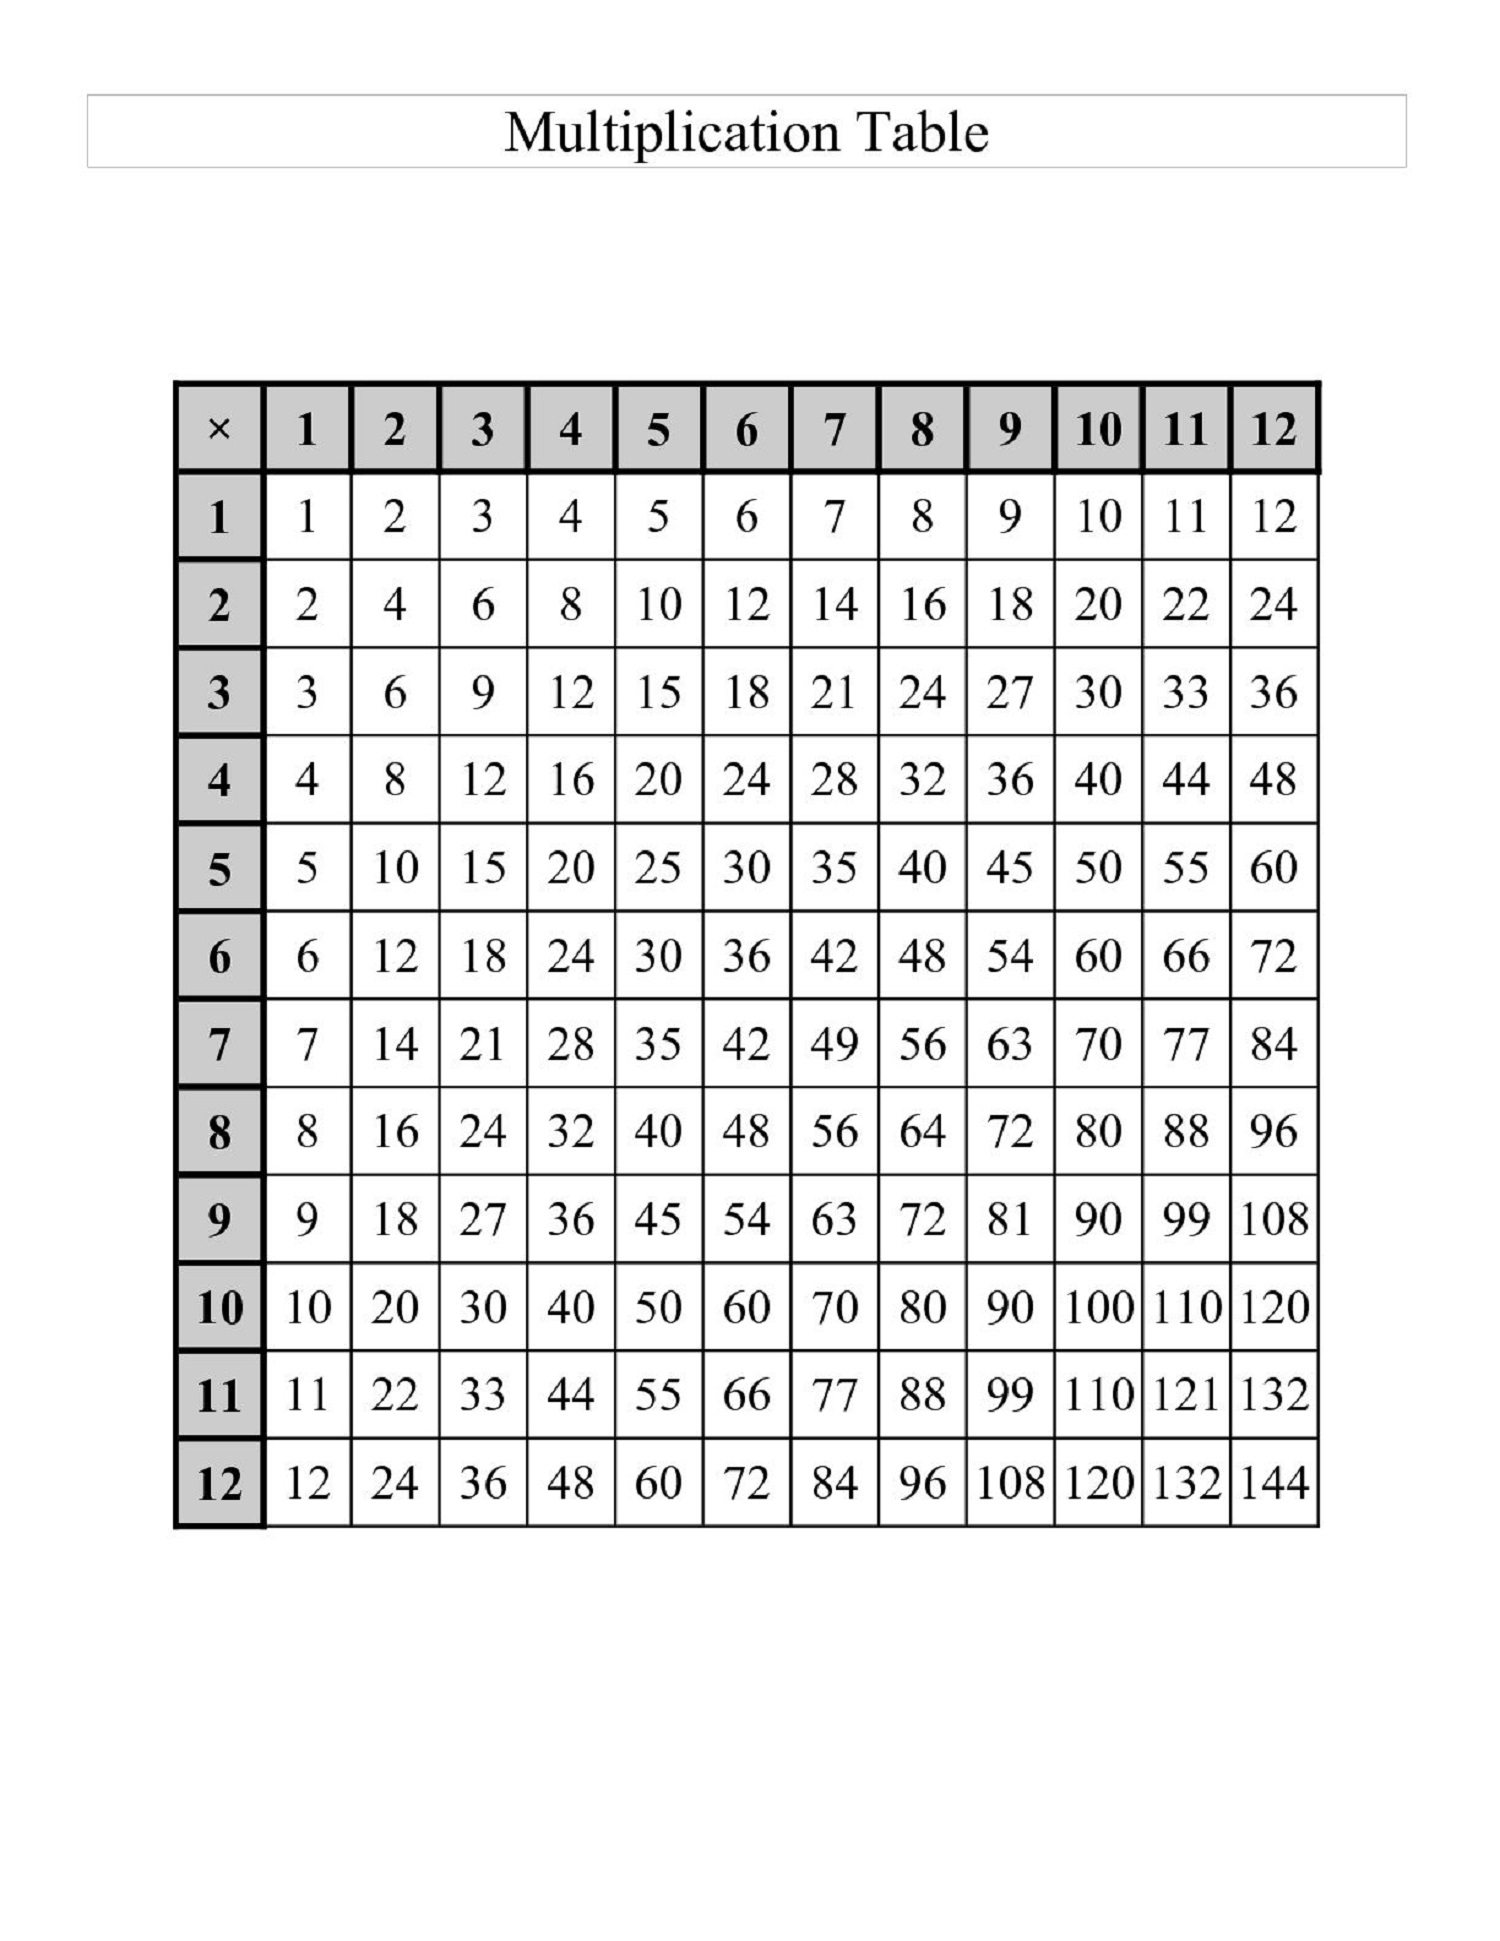 3 times table chart